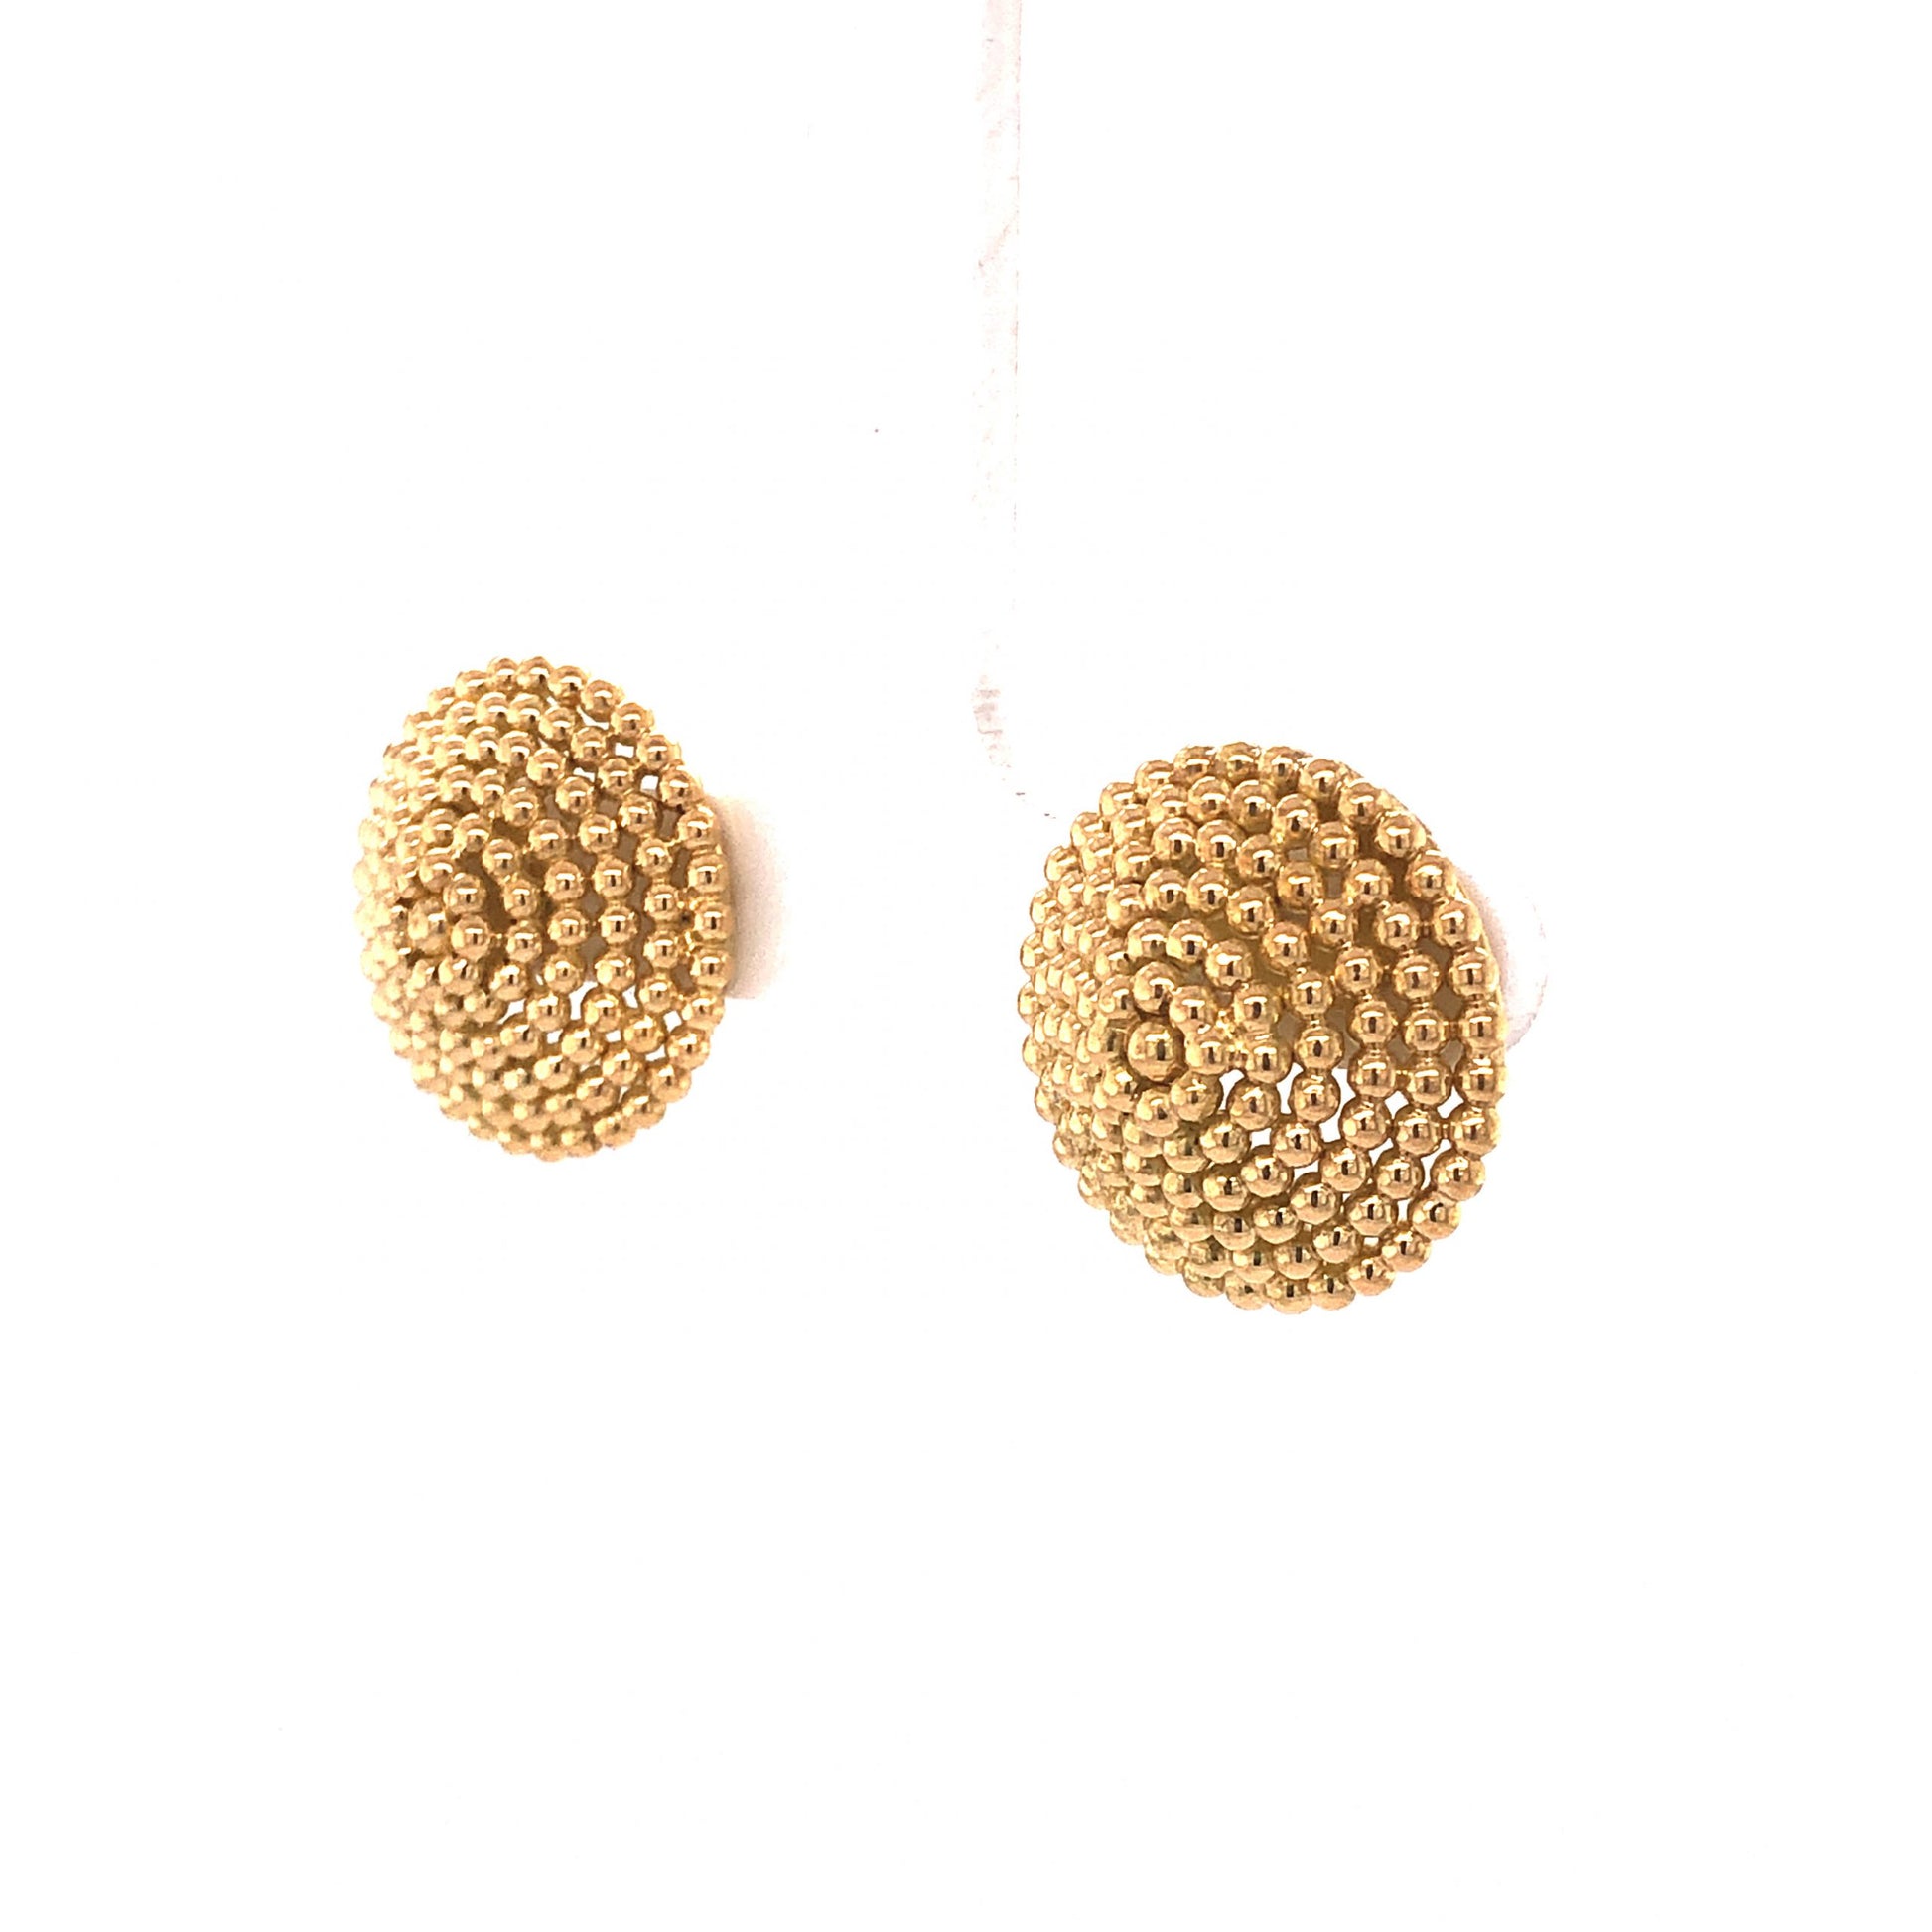 Round Rope Stud Earrings in 14k Yellow GoldComposition: 14 Karat Yellow GoldTotal Gram Weight: 14.3 g